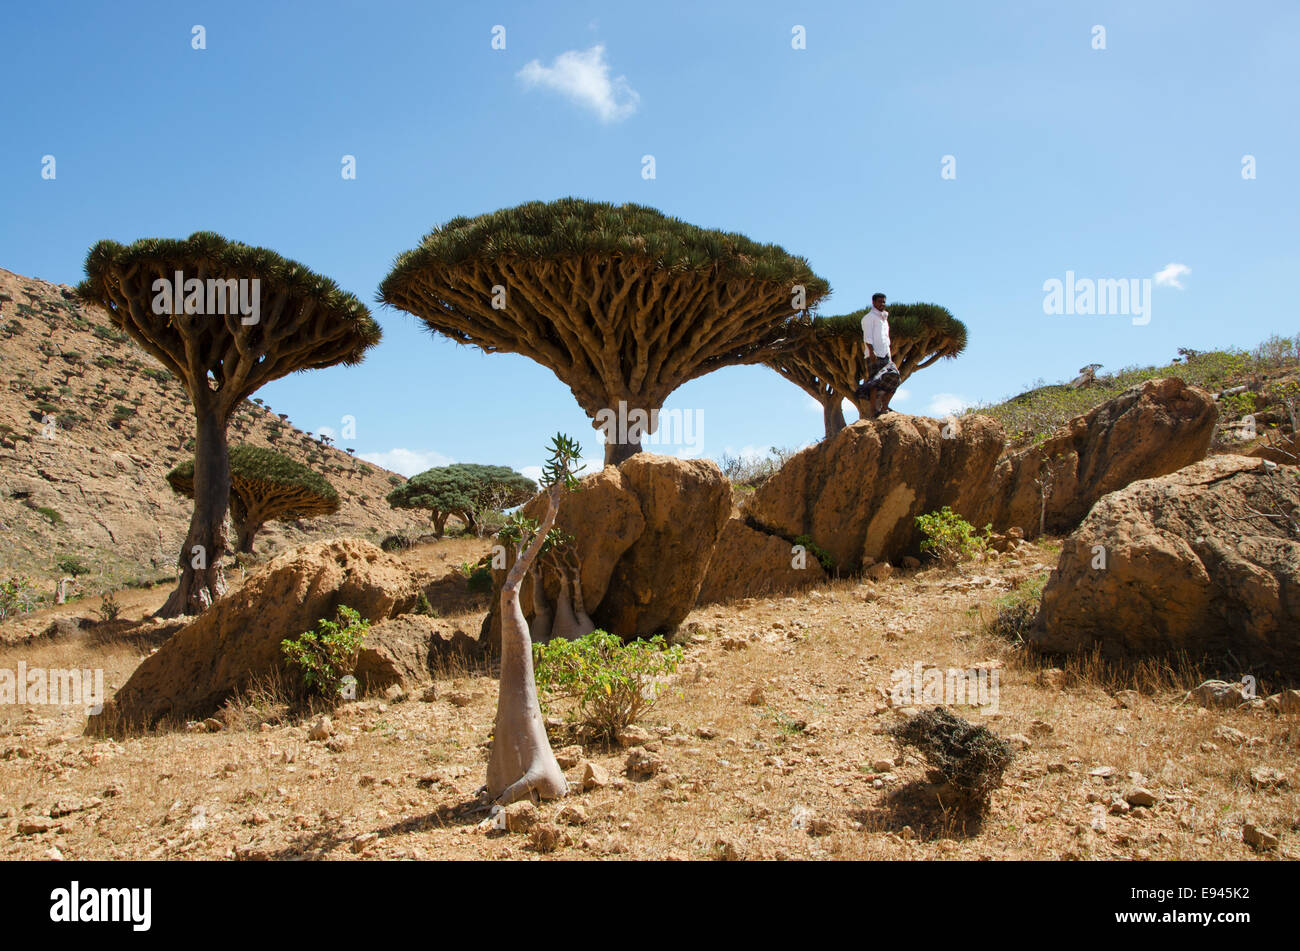 Socotra, Yemen: a yemeni guide standing on a rock in the Dragon Blood Trees forest in Homhil Plateau Stock Photo